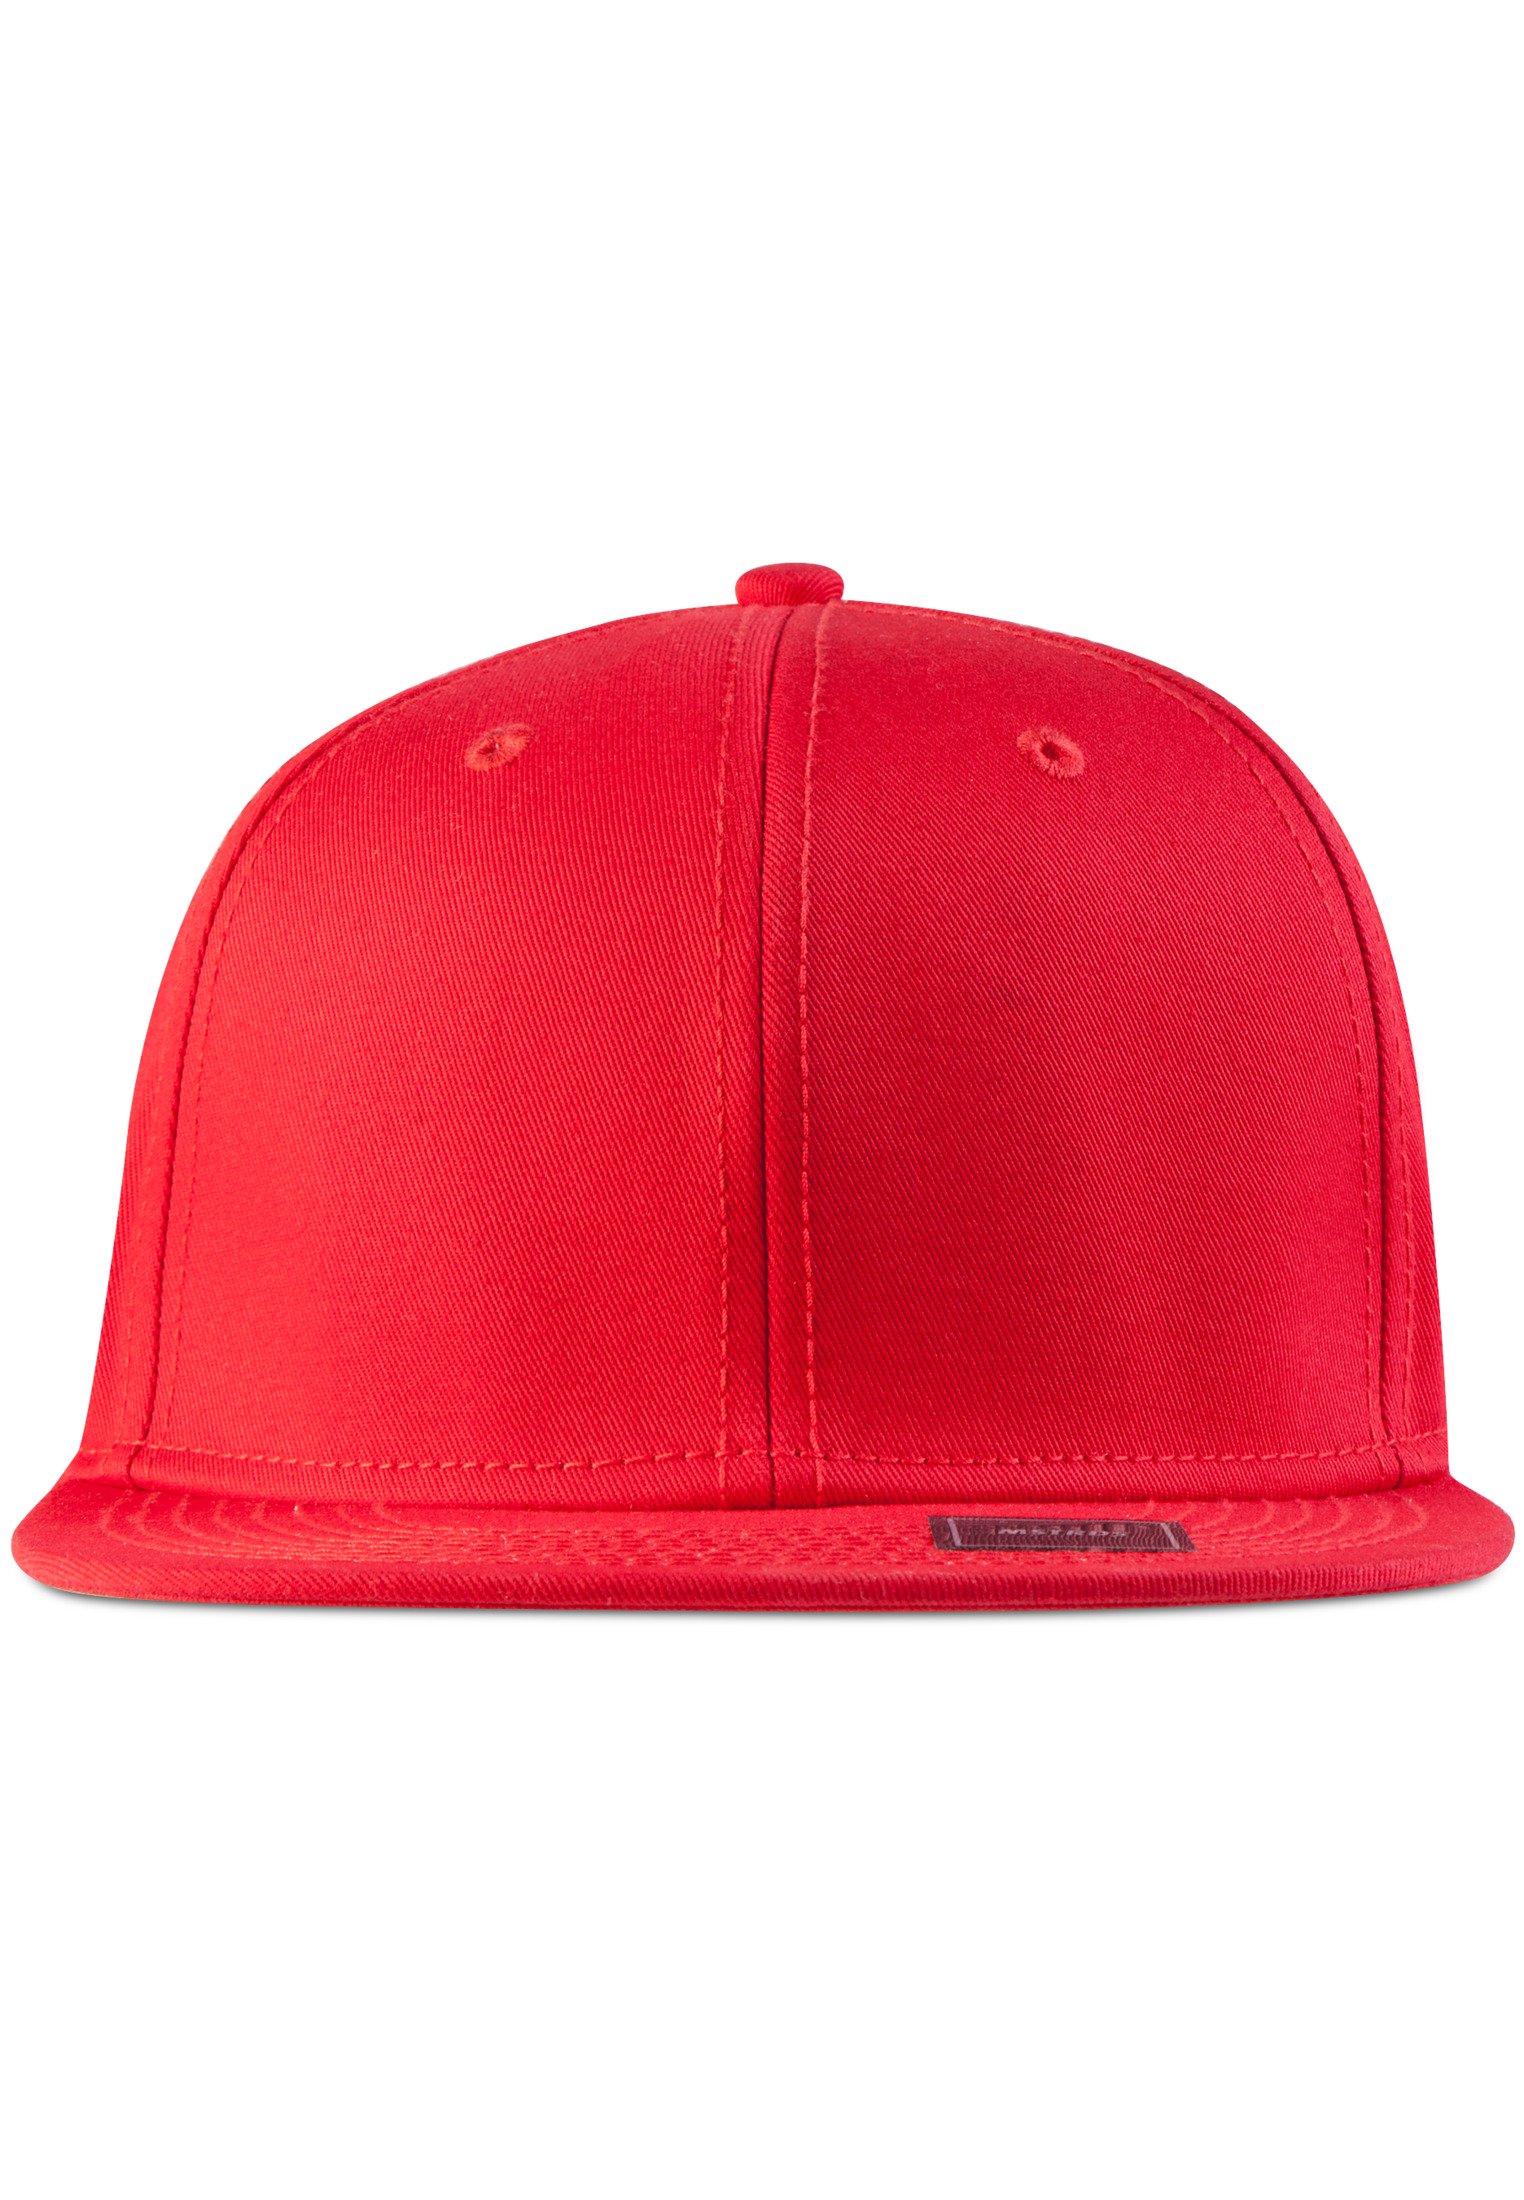 MoneyClip Snapback Cap red one size